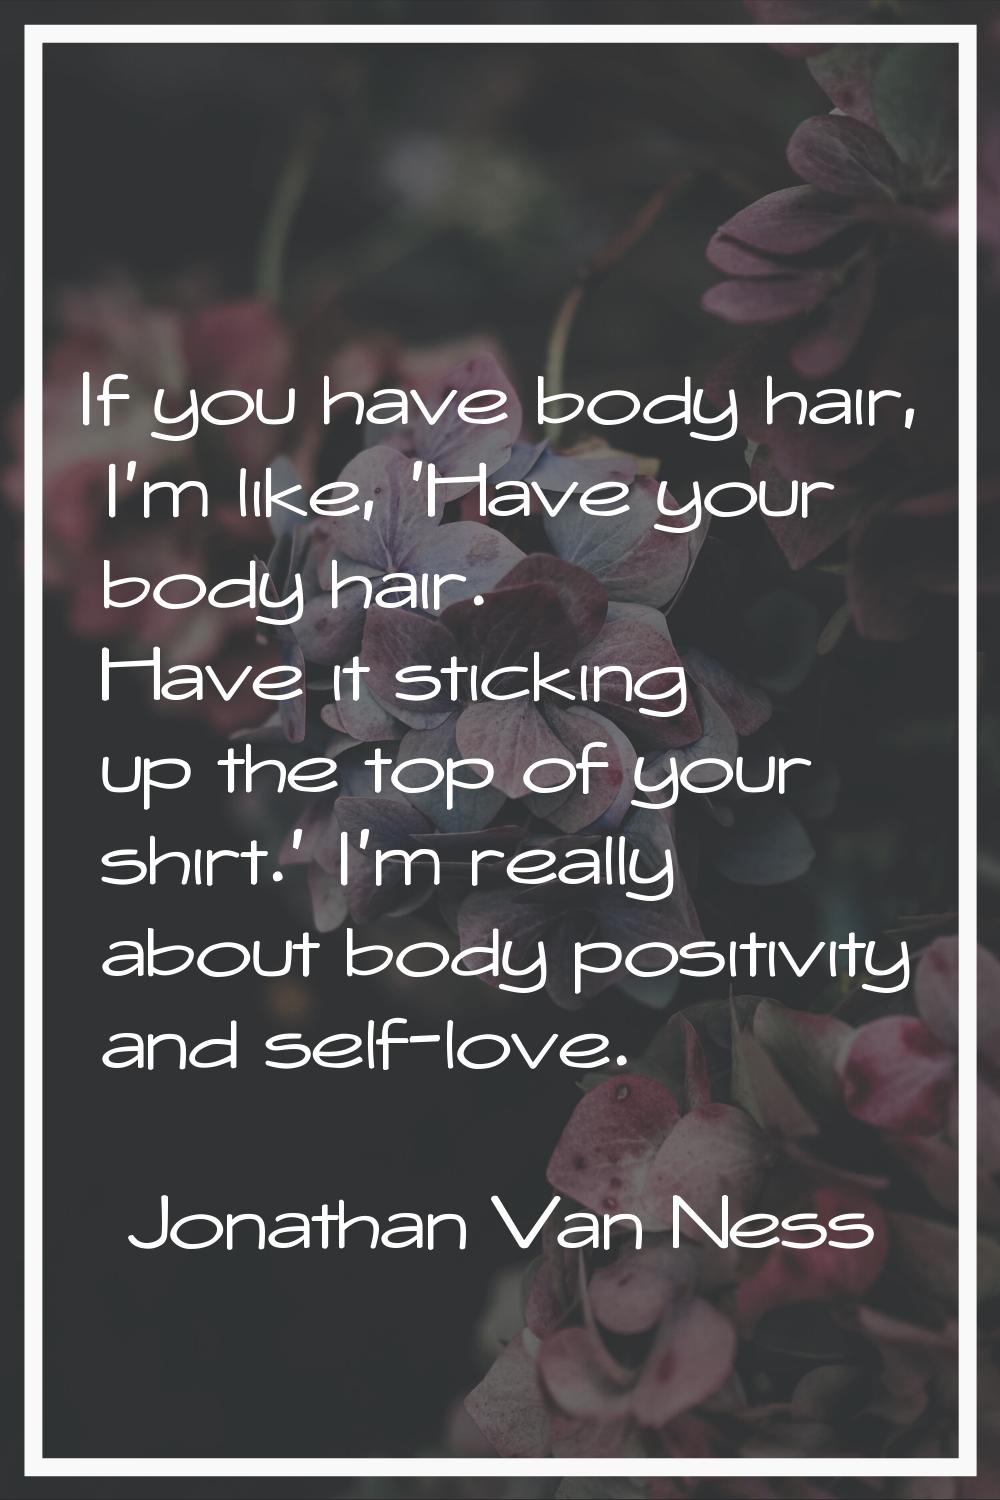 If you have body hair, I'm like, 'Have your body hair. Have it sticking up the top of your shirt.' 